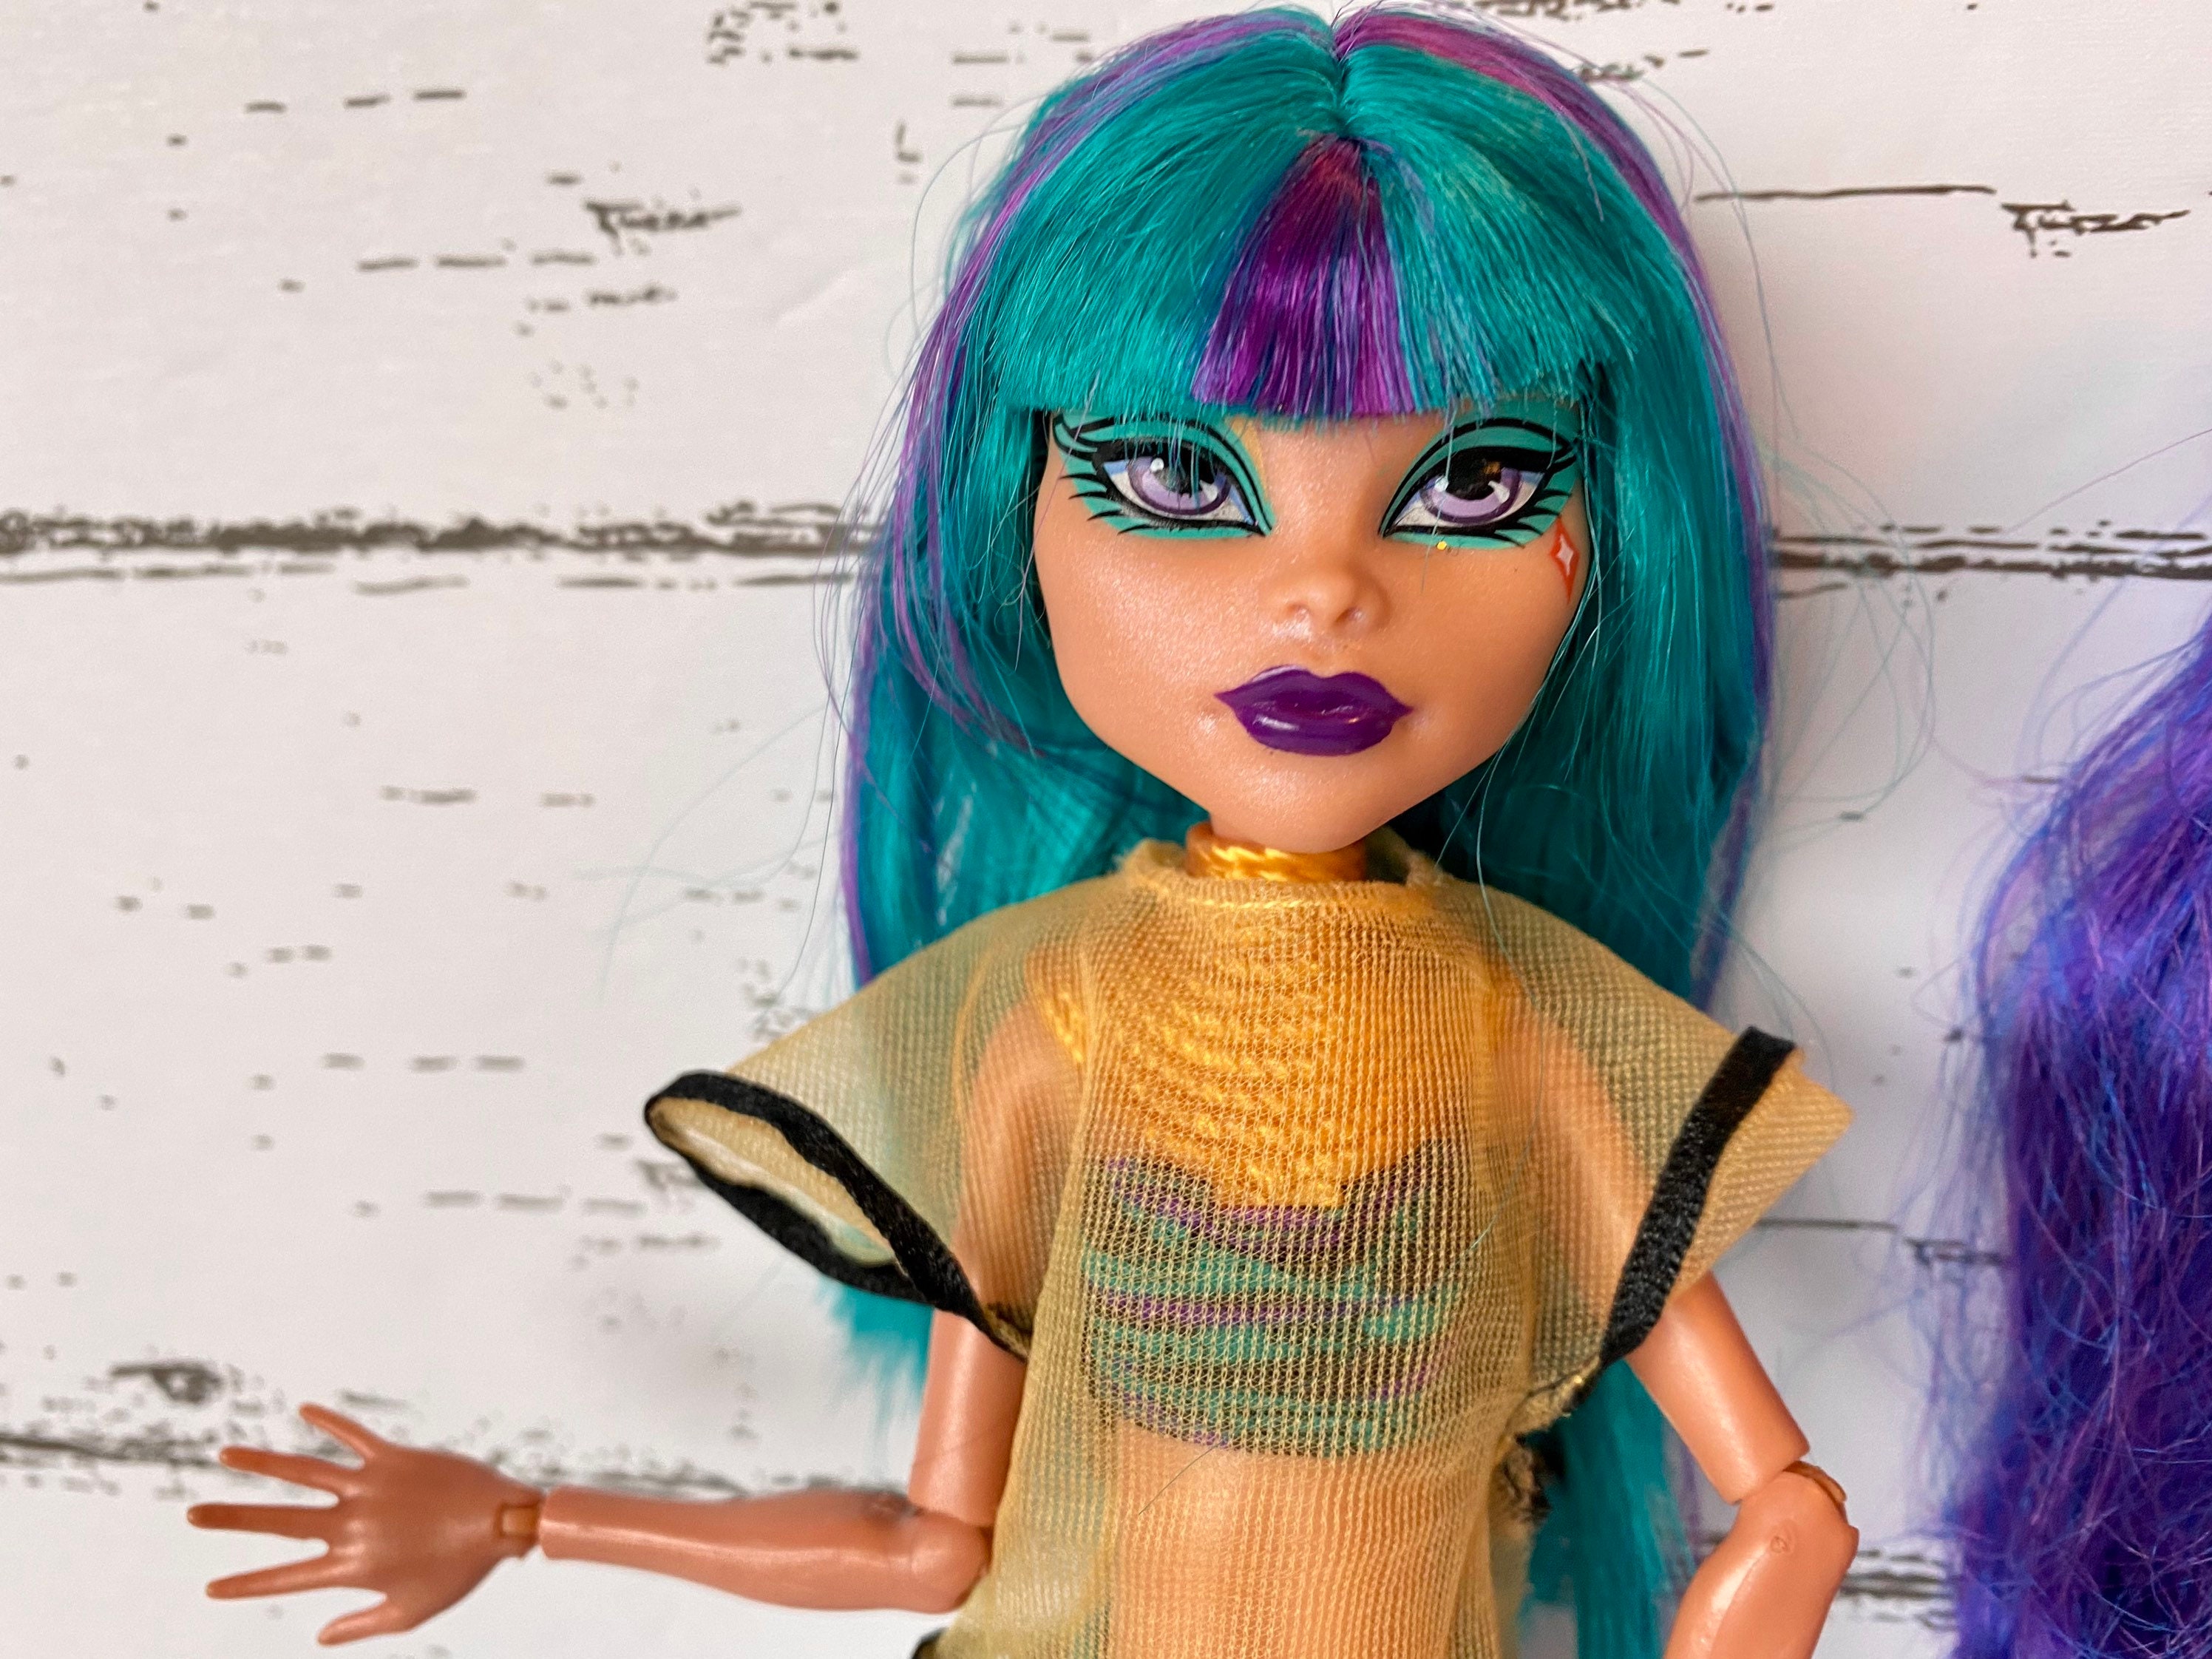 Monster High Doll - Green and Blue Hair Color - wide 4